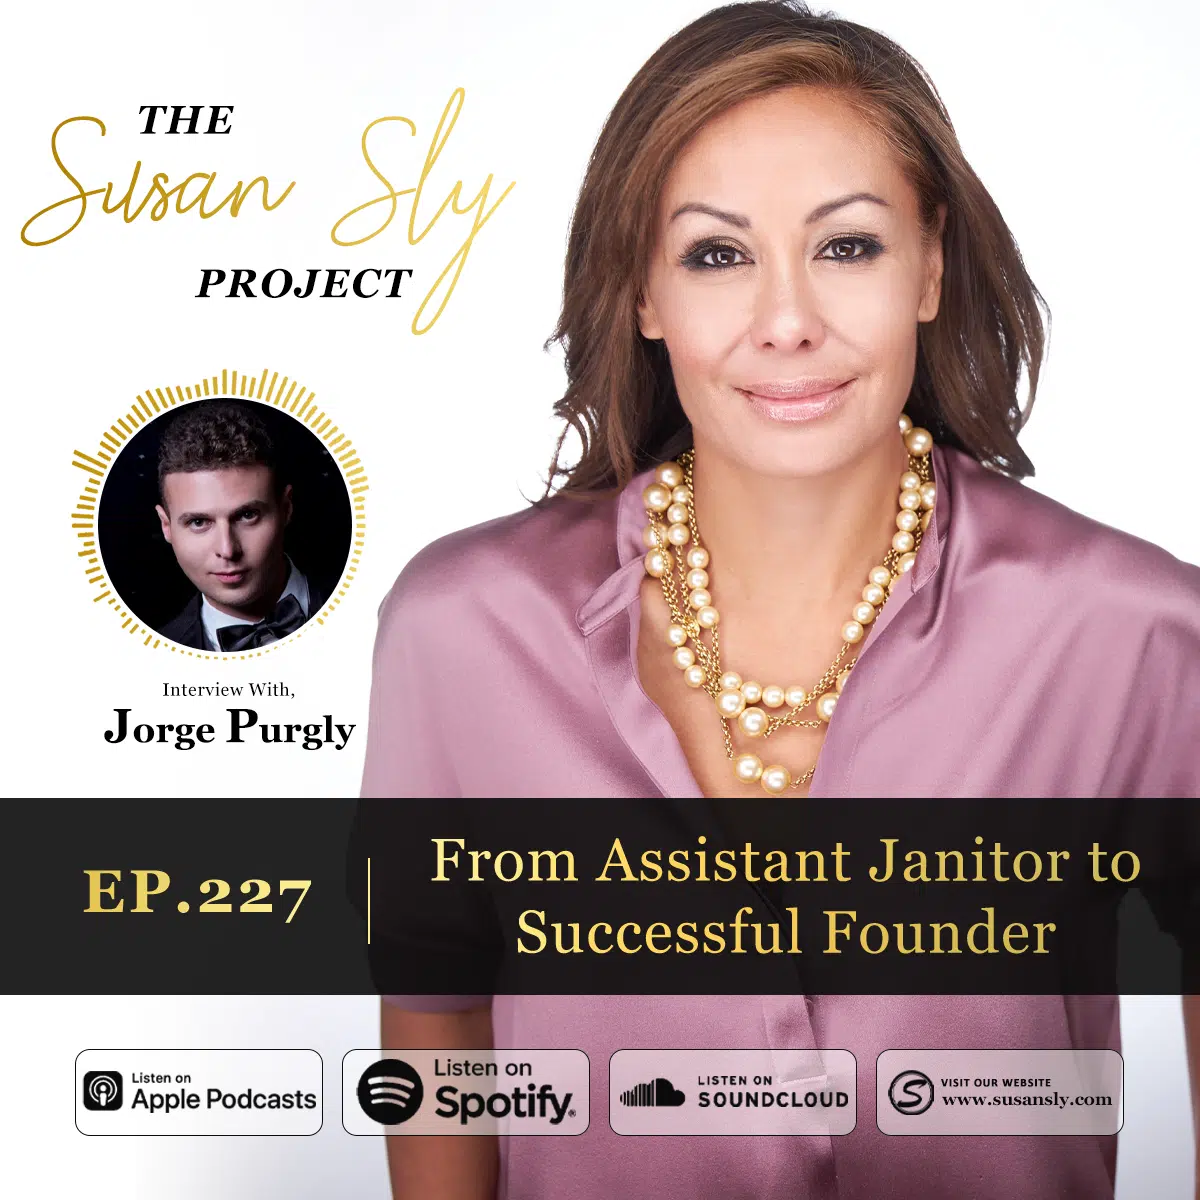 Susan Sly interview with Jorge Purgly